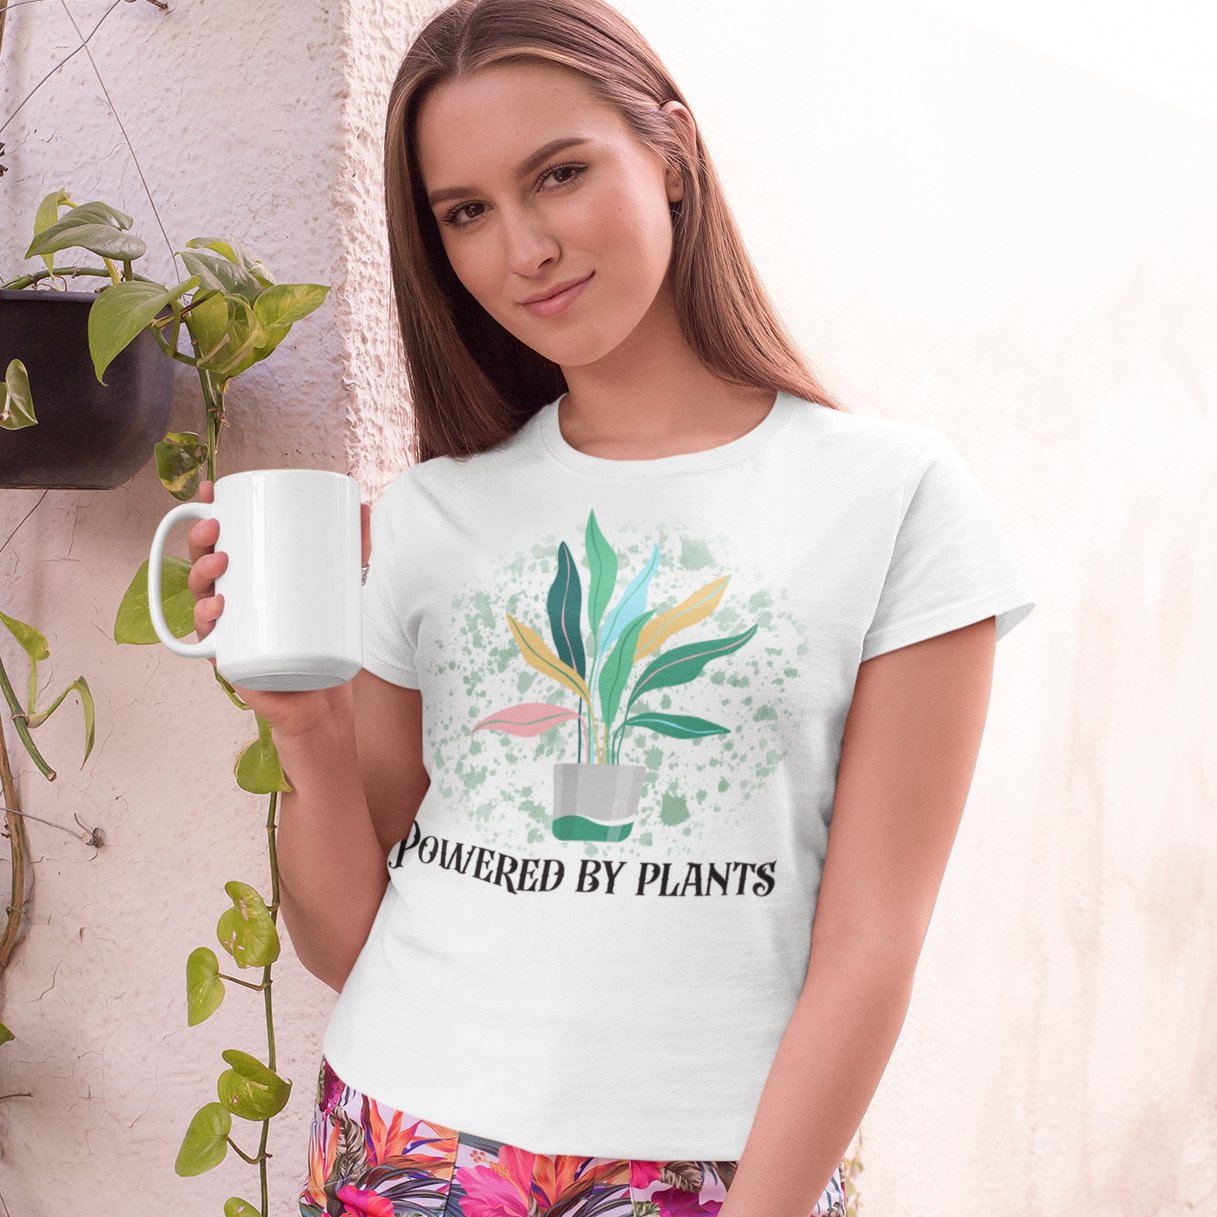 Powered By Plants: Eco-Friendly Statement T-shirt – Where Green Living Meets Comfort!